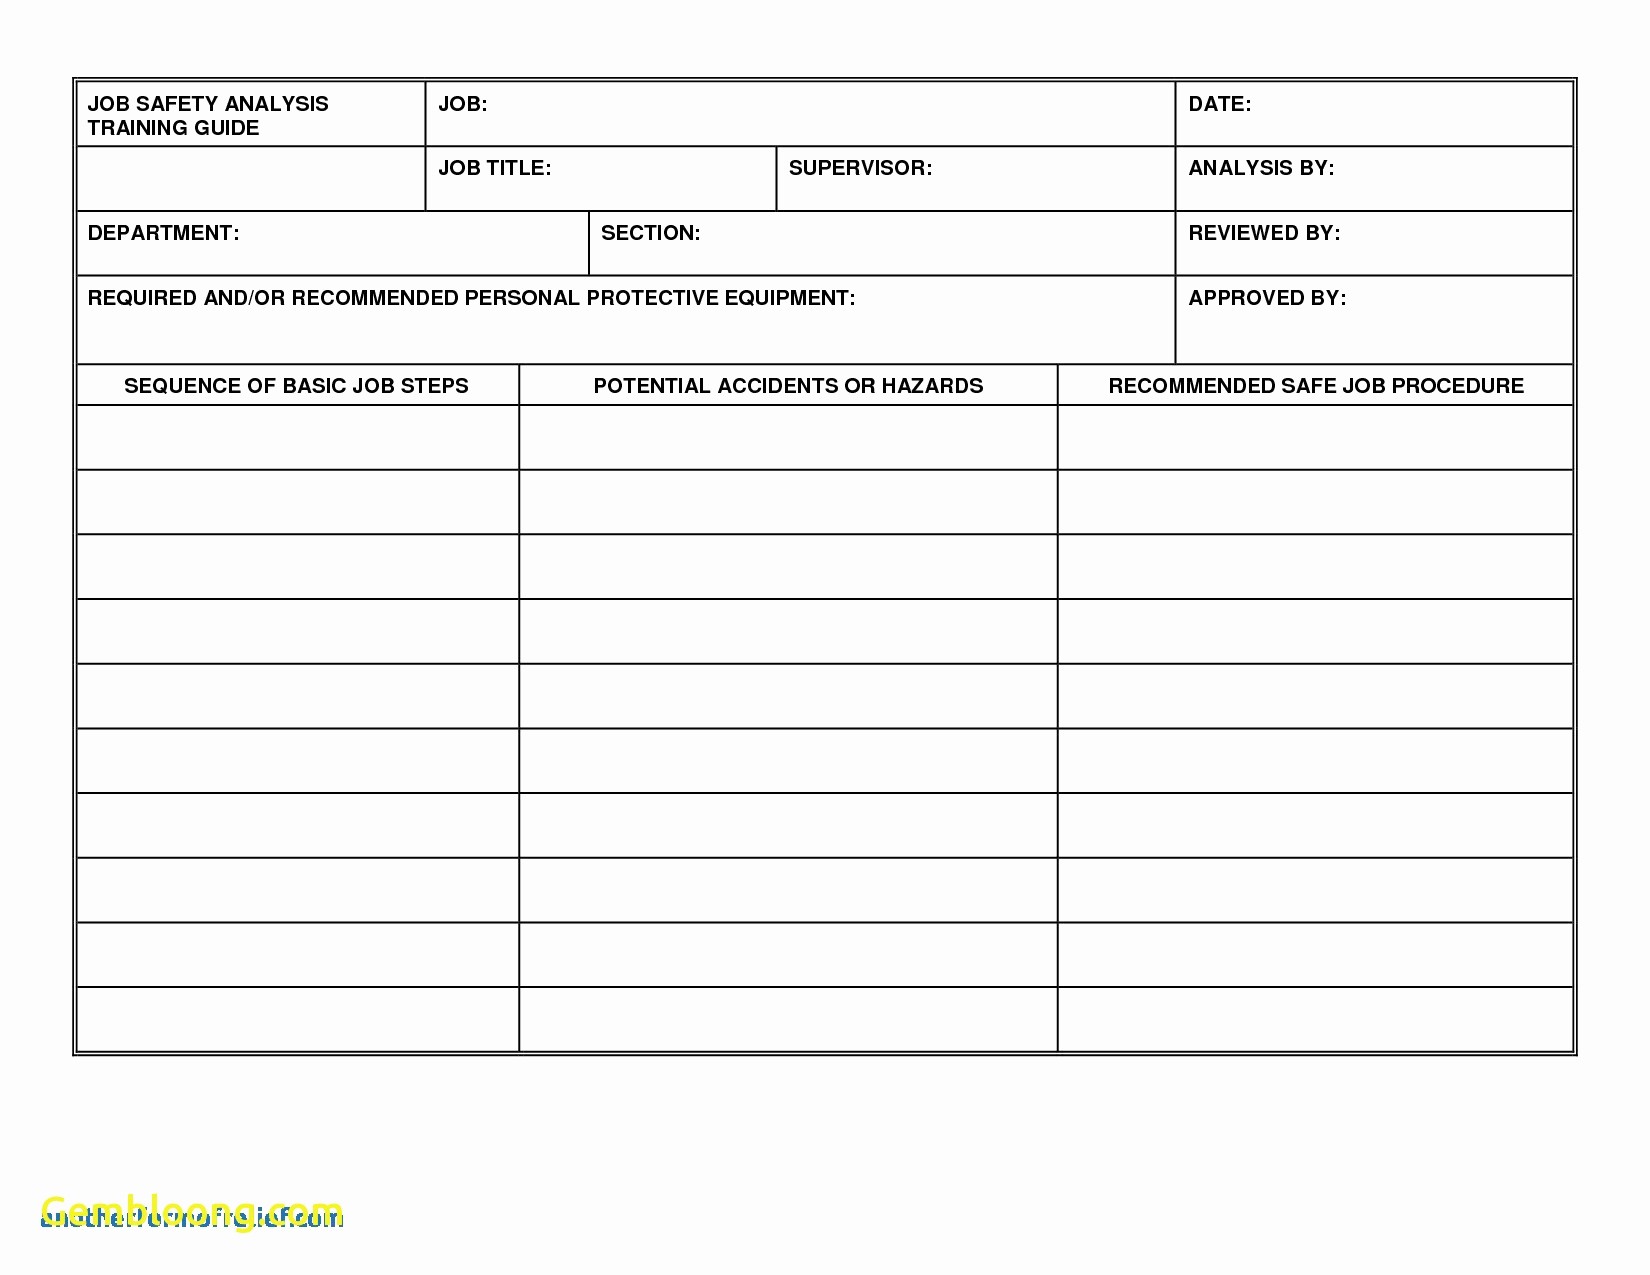 Certificate Of Analysis Template Excel Unique Jsa Template Word Sample Certificate Analysis Copy